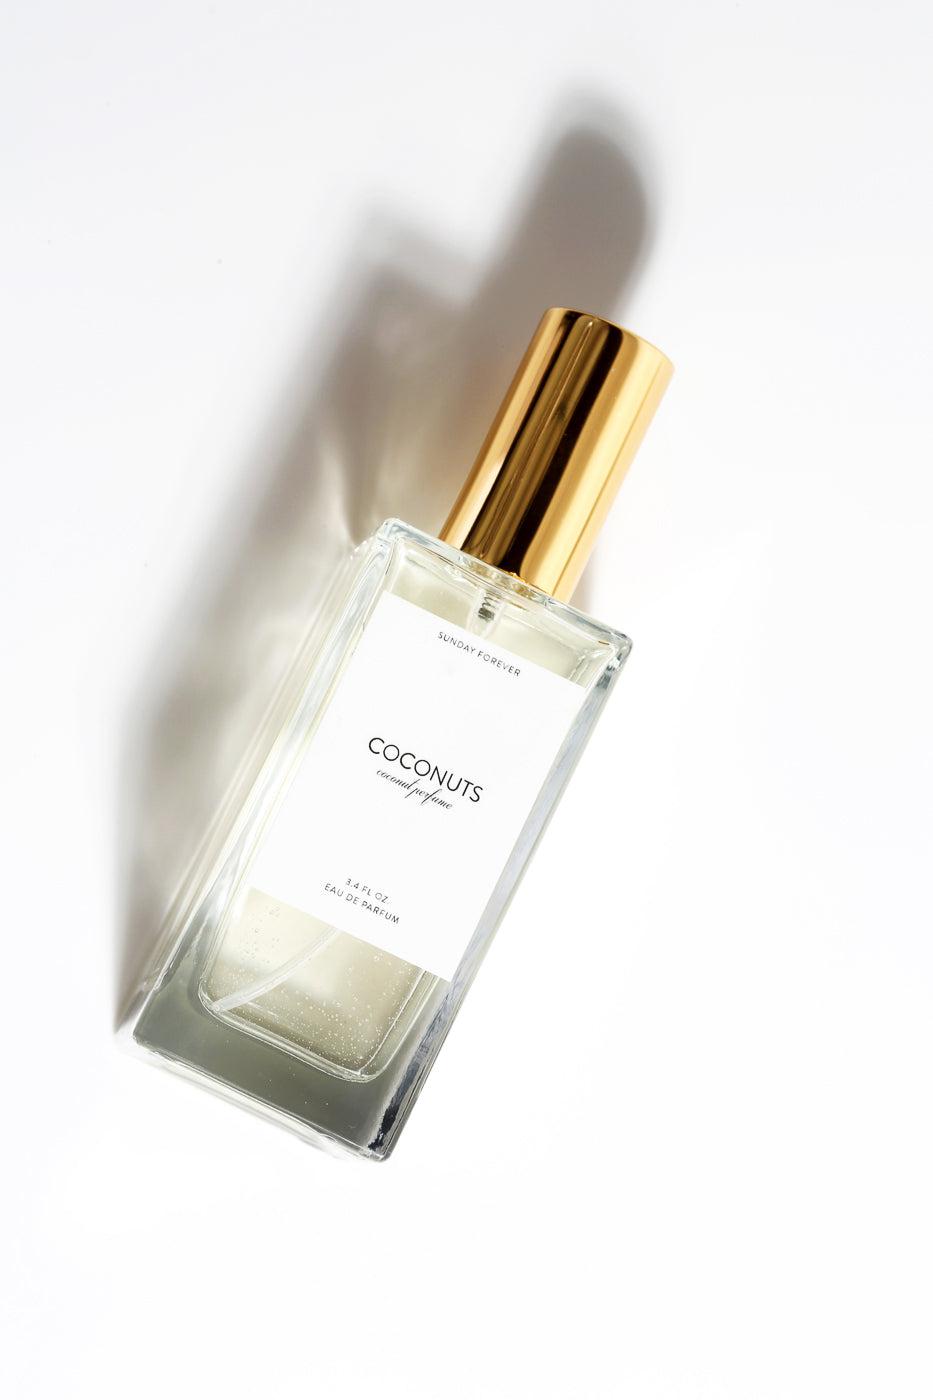 Sunday Forever Coconuts Perfume 